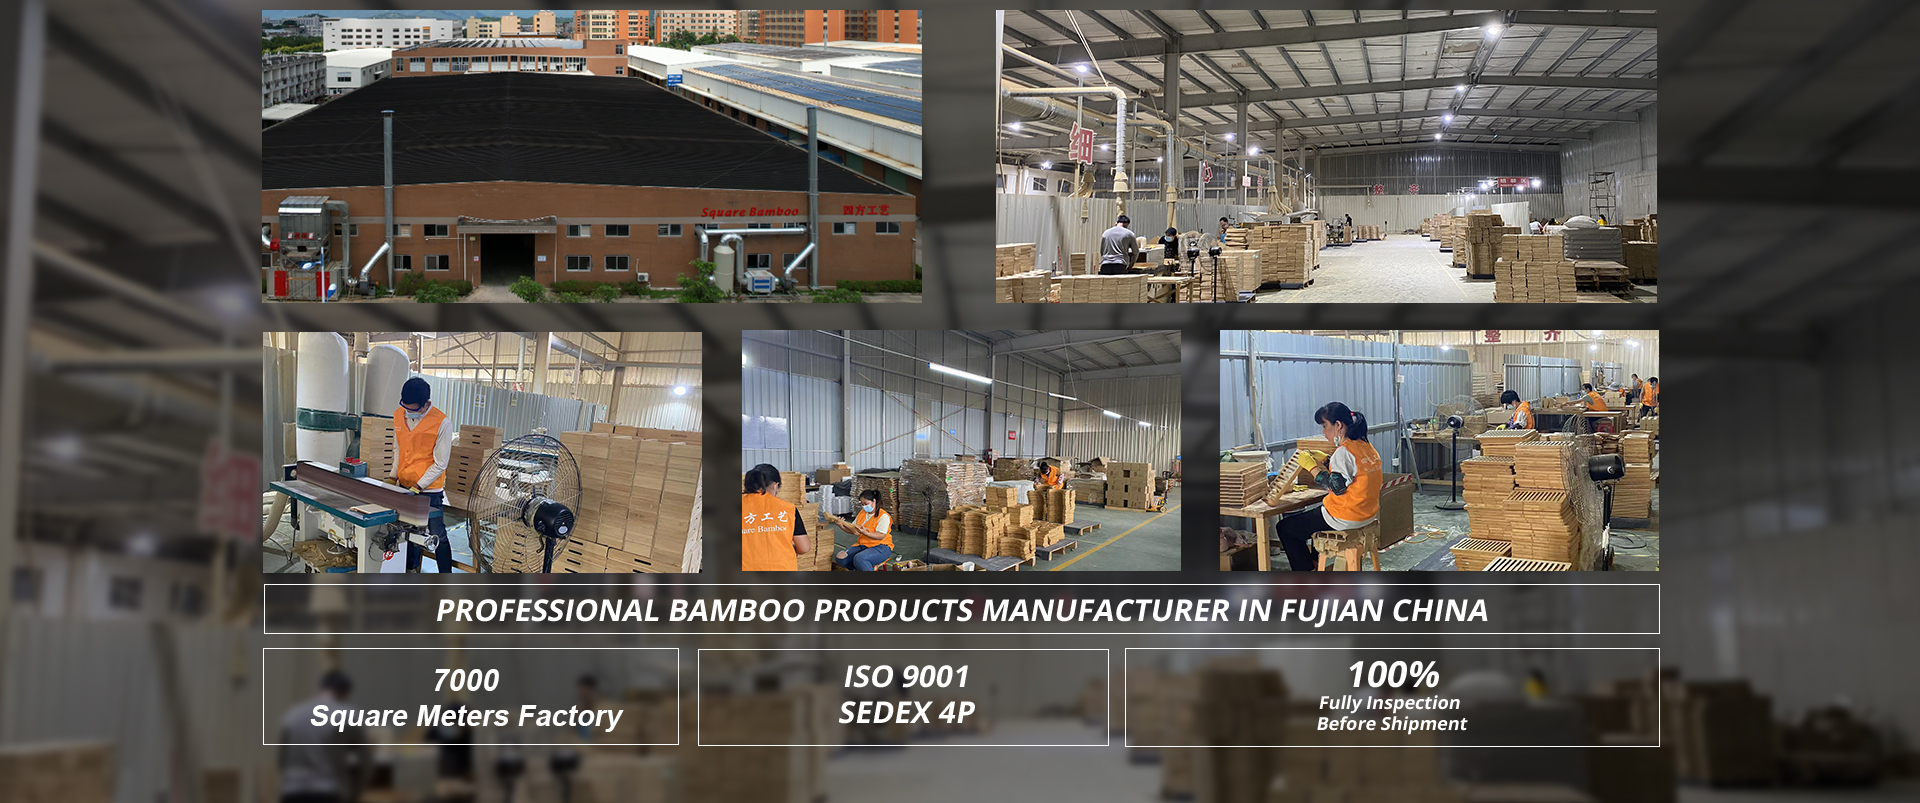 PROFESSIONAL BAMBO0 PRODUCTS MANUFACTURER IN FUJIAN CHINA
